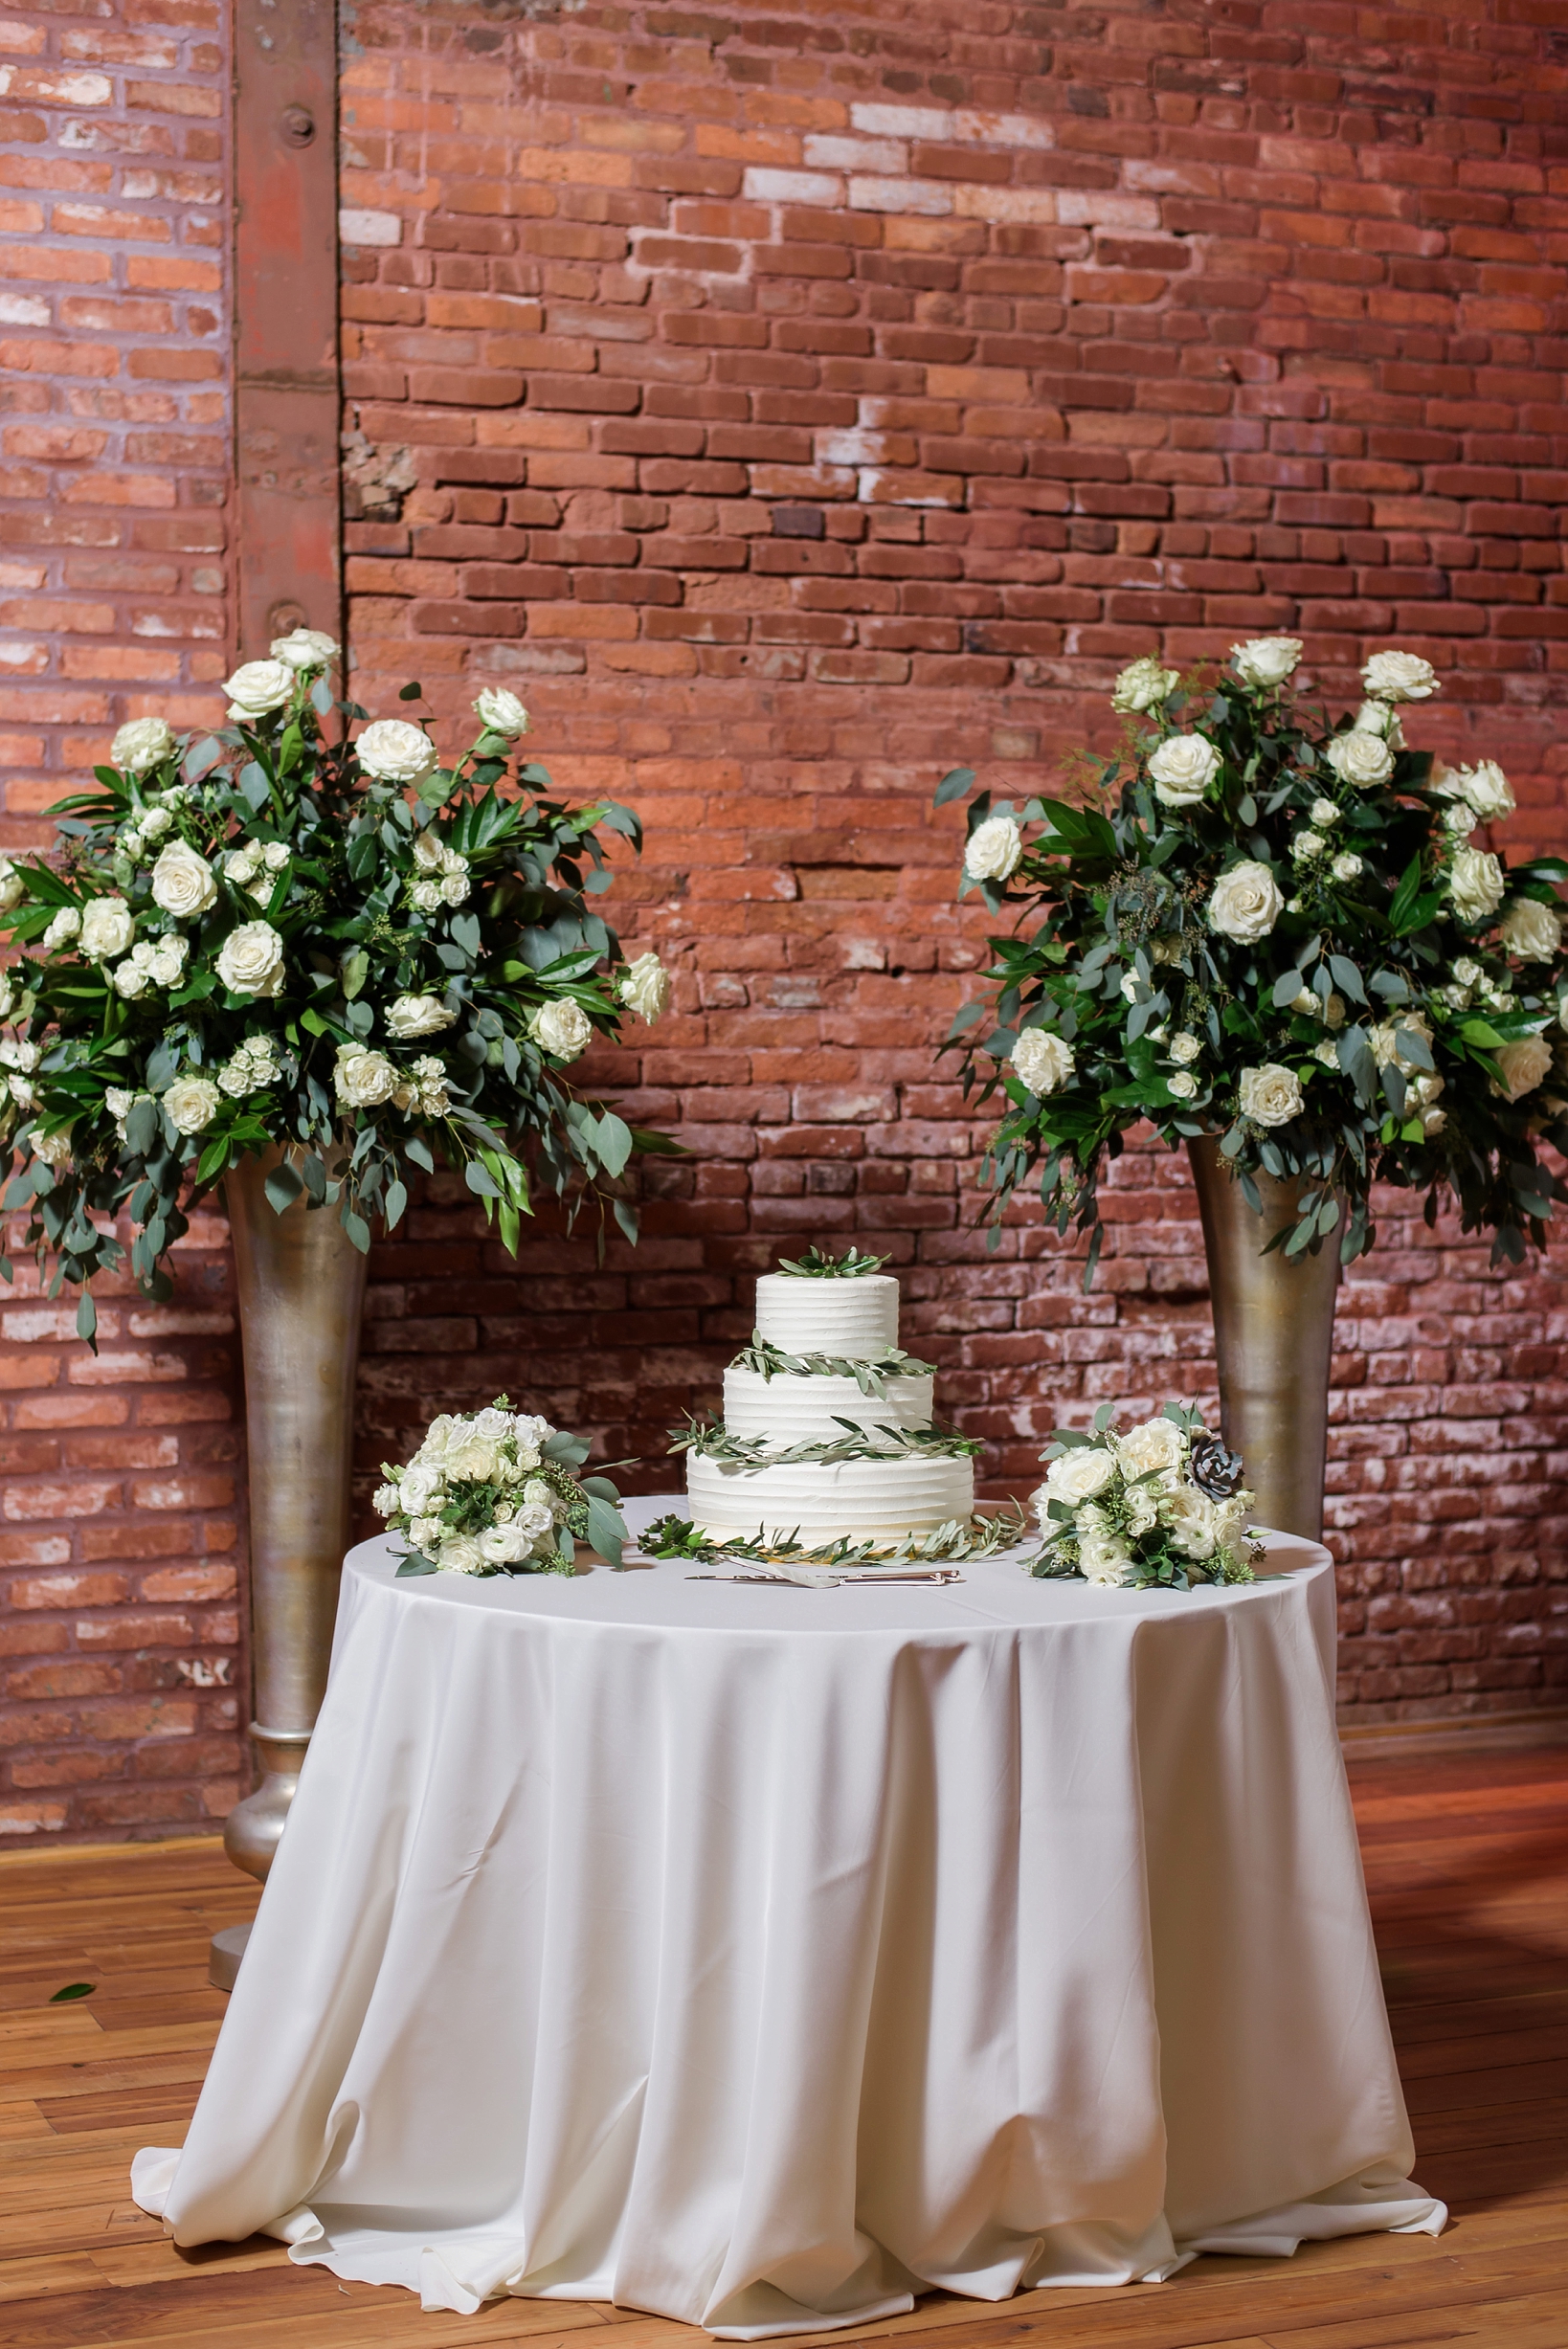 The wedding cake with eucalyptus leaves accenting the table with brick wall background